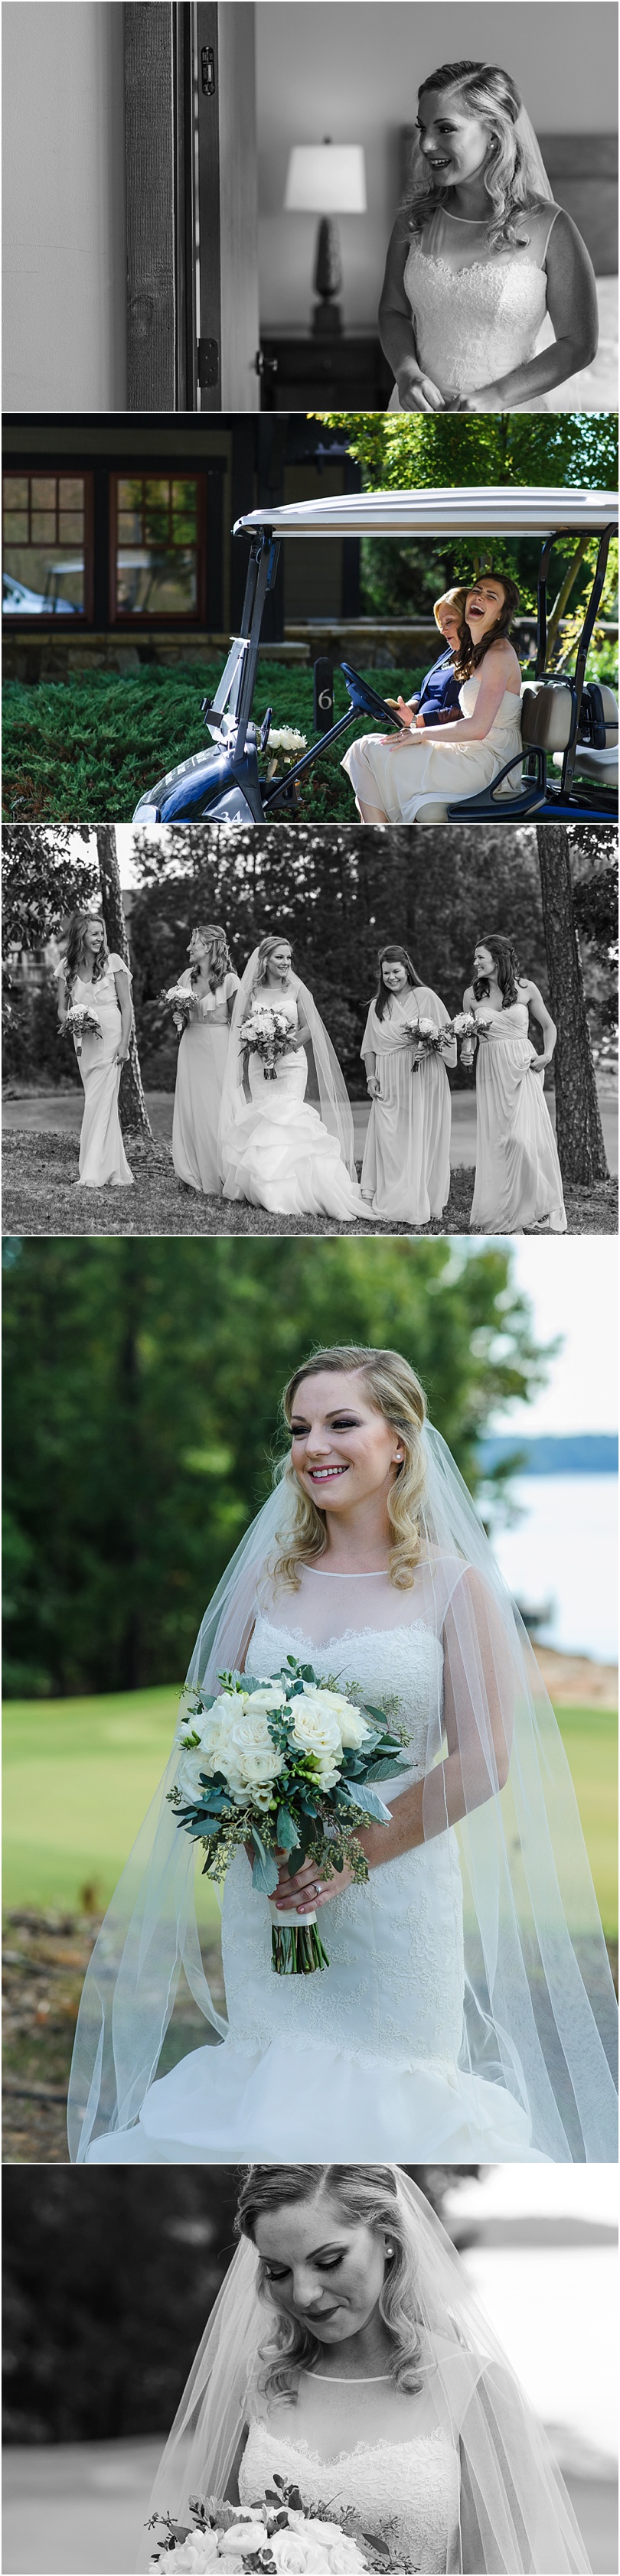 Kristin made such a stunning bride in her fitted whimsical lace dress